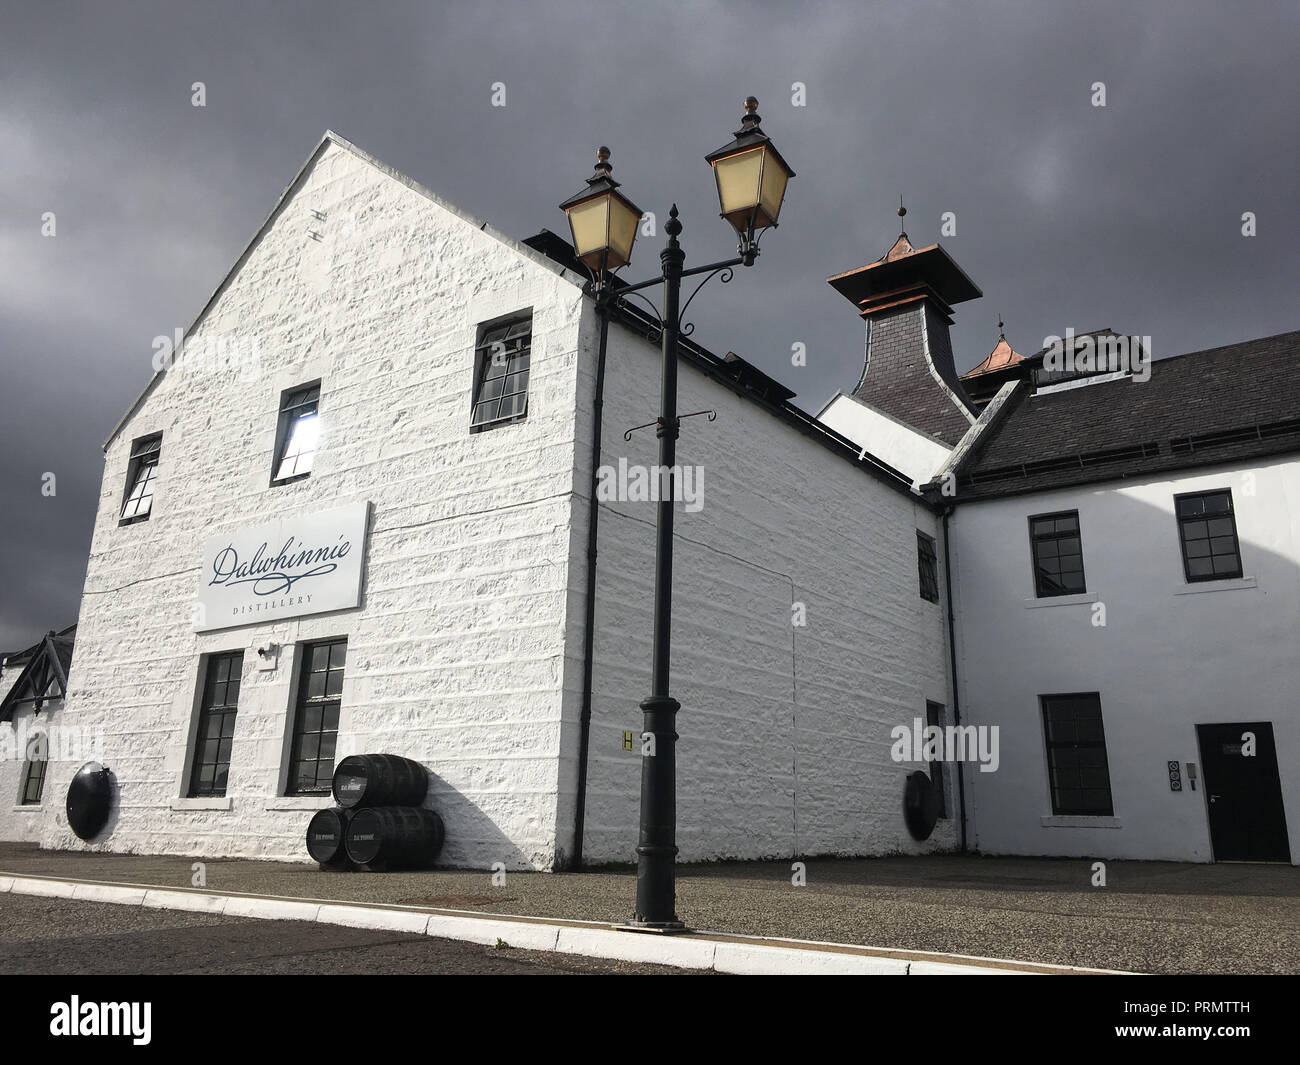 Dalwhinnie whisky distillery, in Dalwhinnie, Scotland, on 02 October 2018. Stock Photo